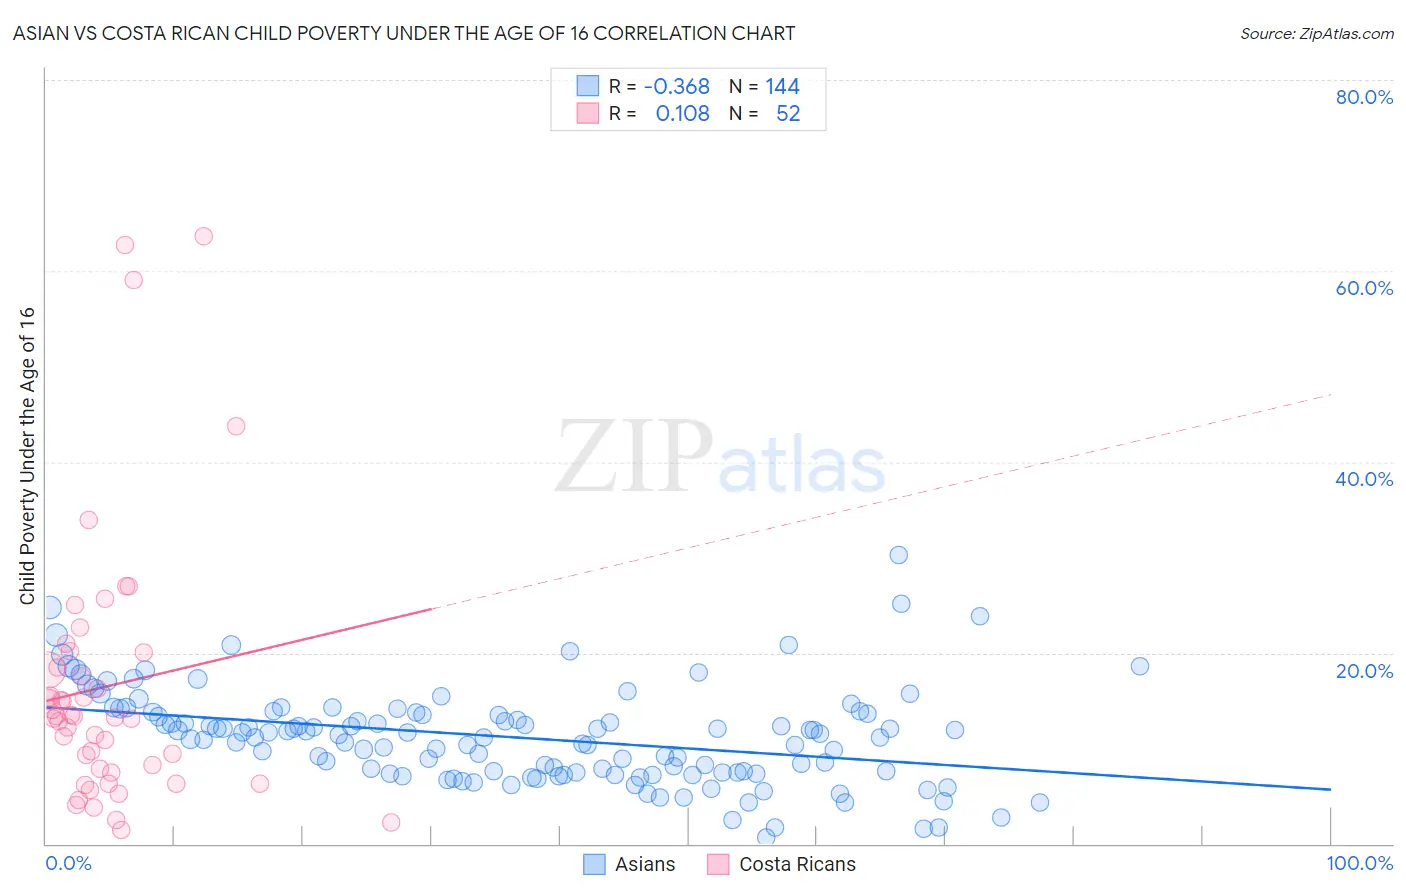 Asian vs Costa Rican Child Poverty Under the Age of 16